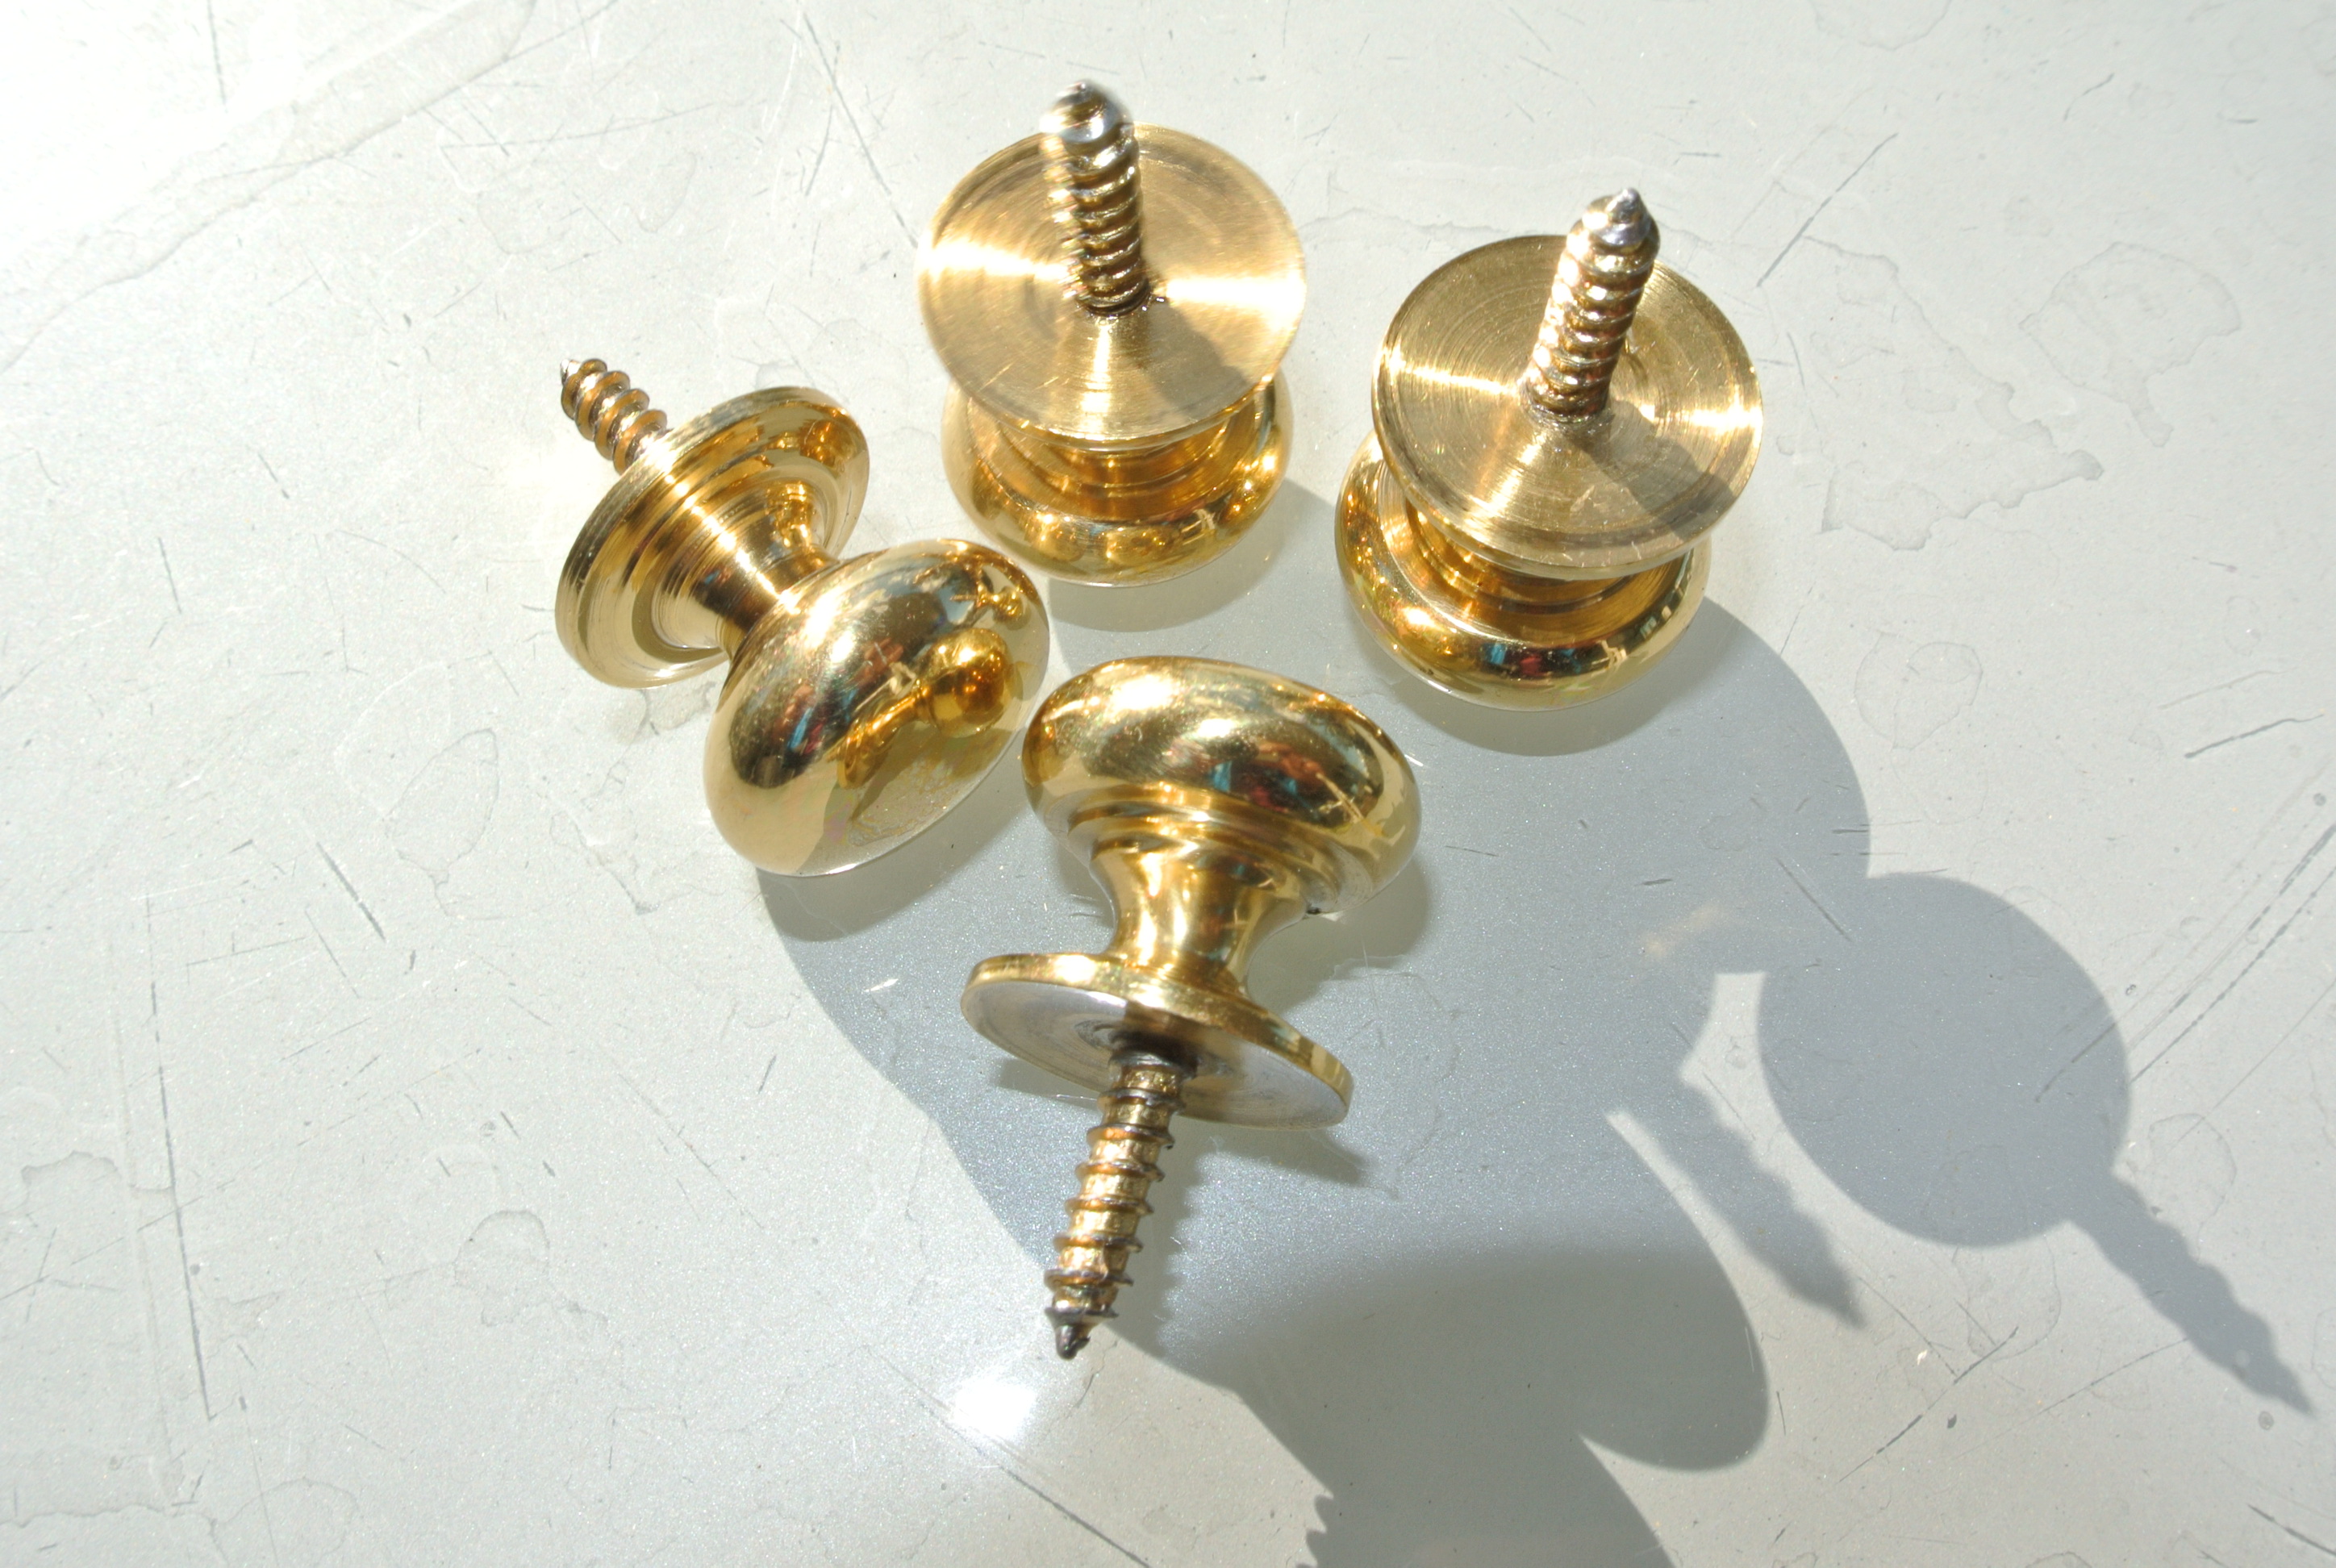 4 very small screw KNOBS pulls handles watson 237A antique solid